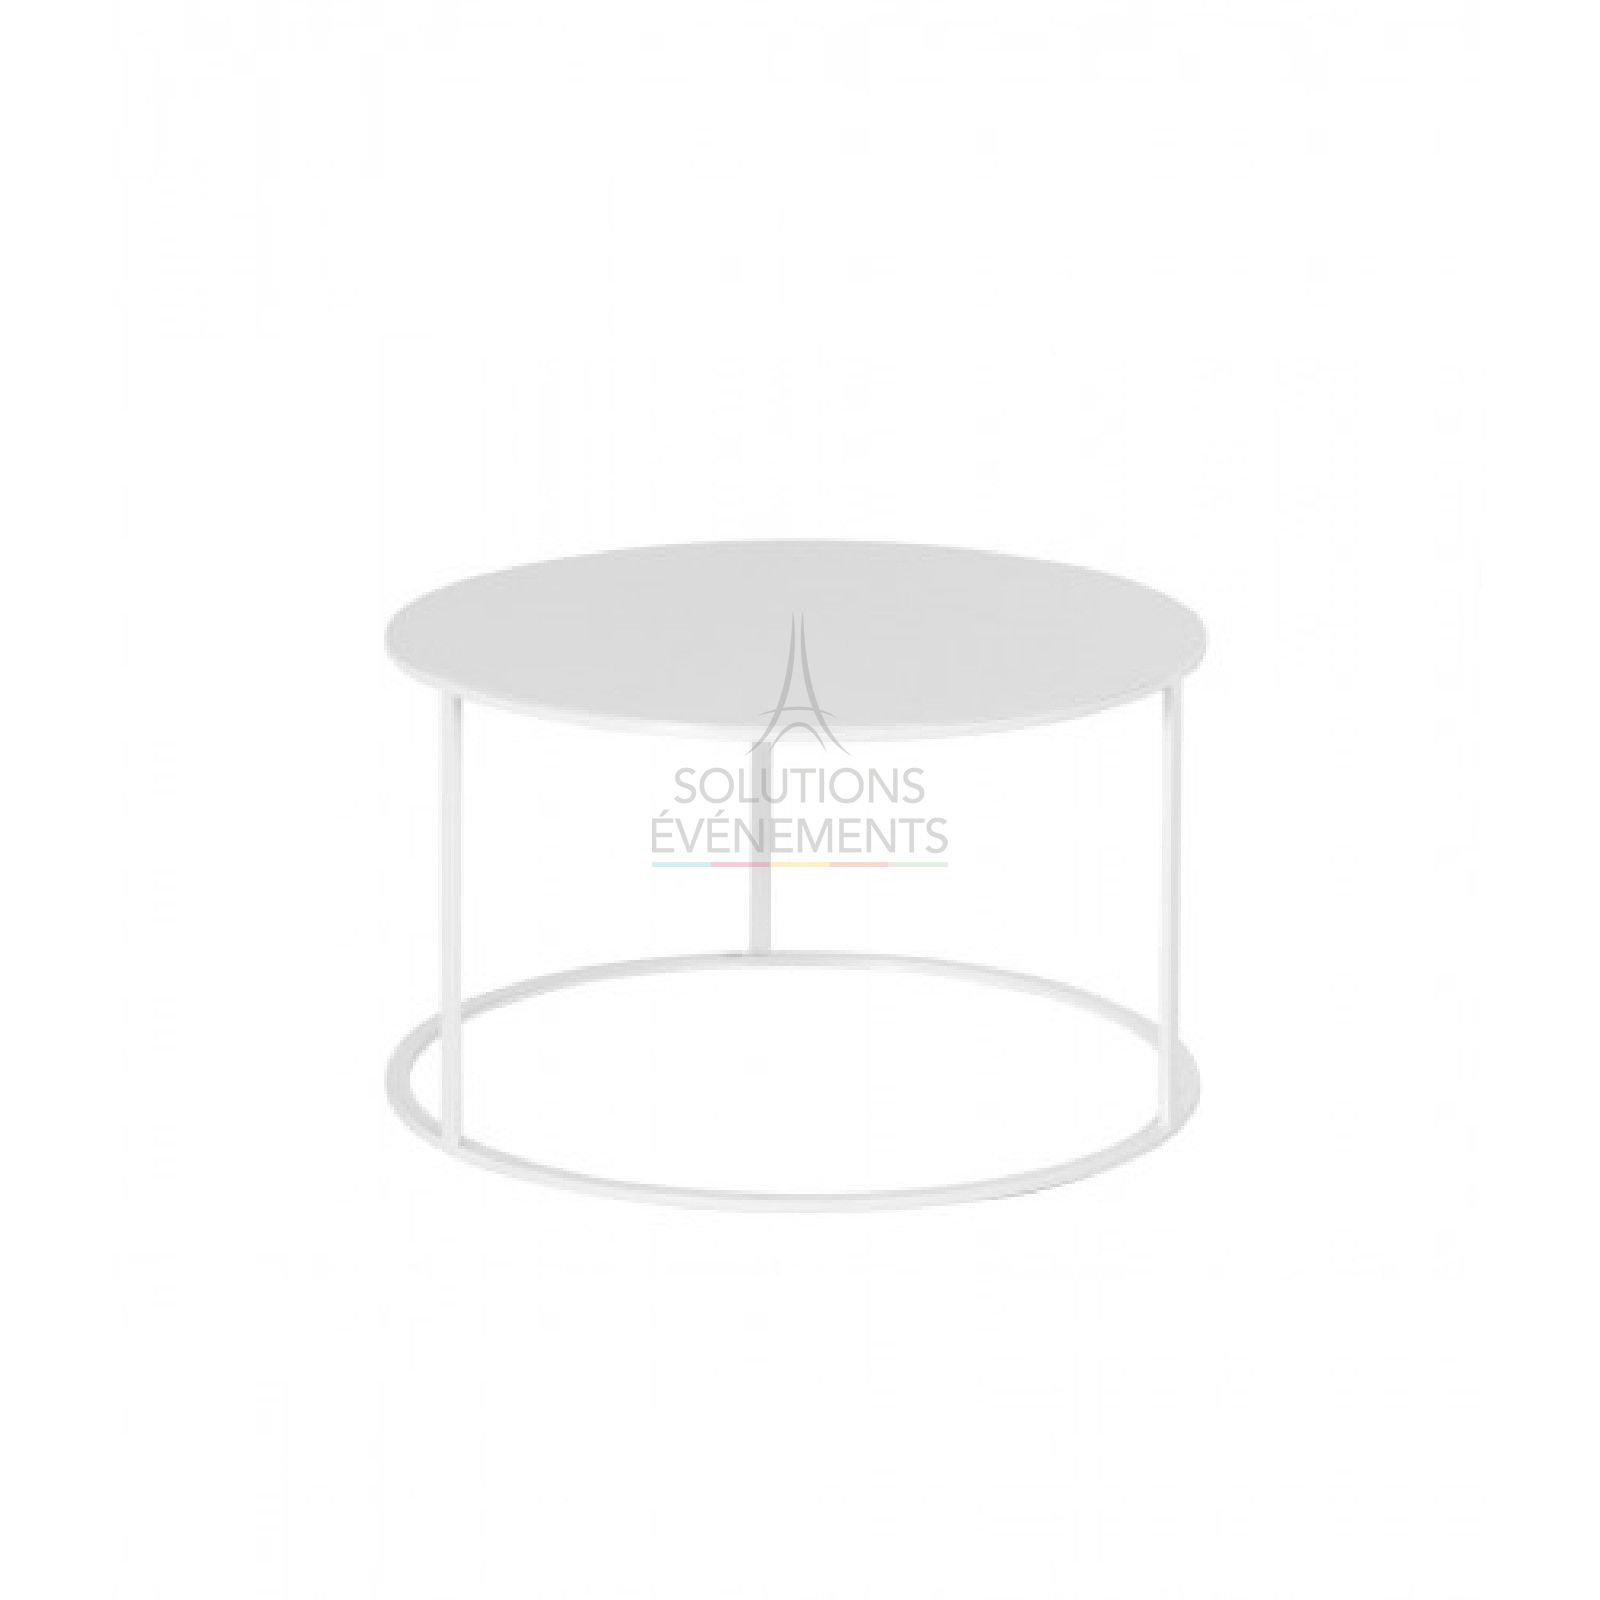 Lounge coffee table rental. White color